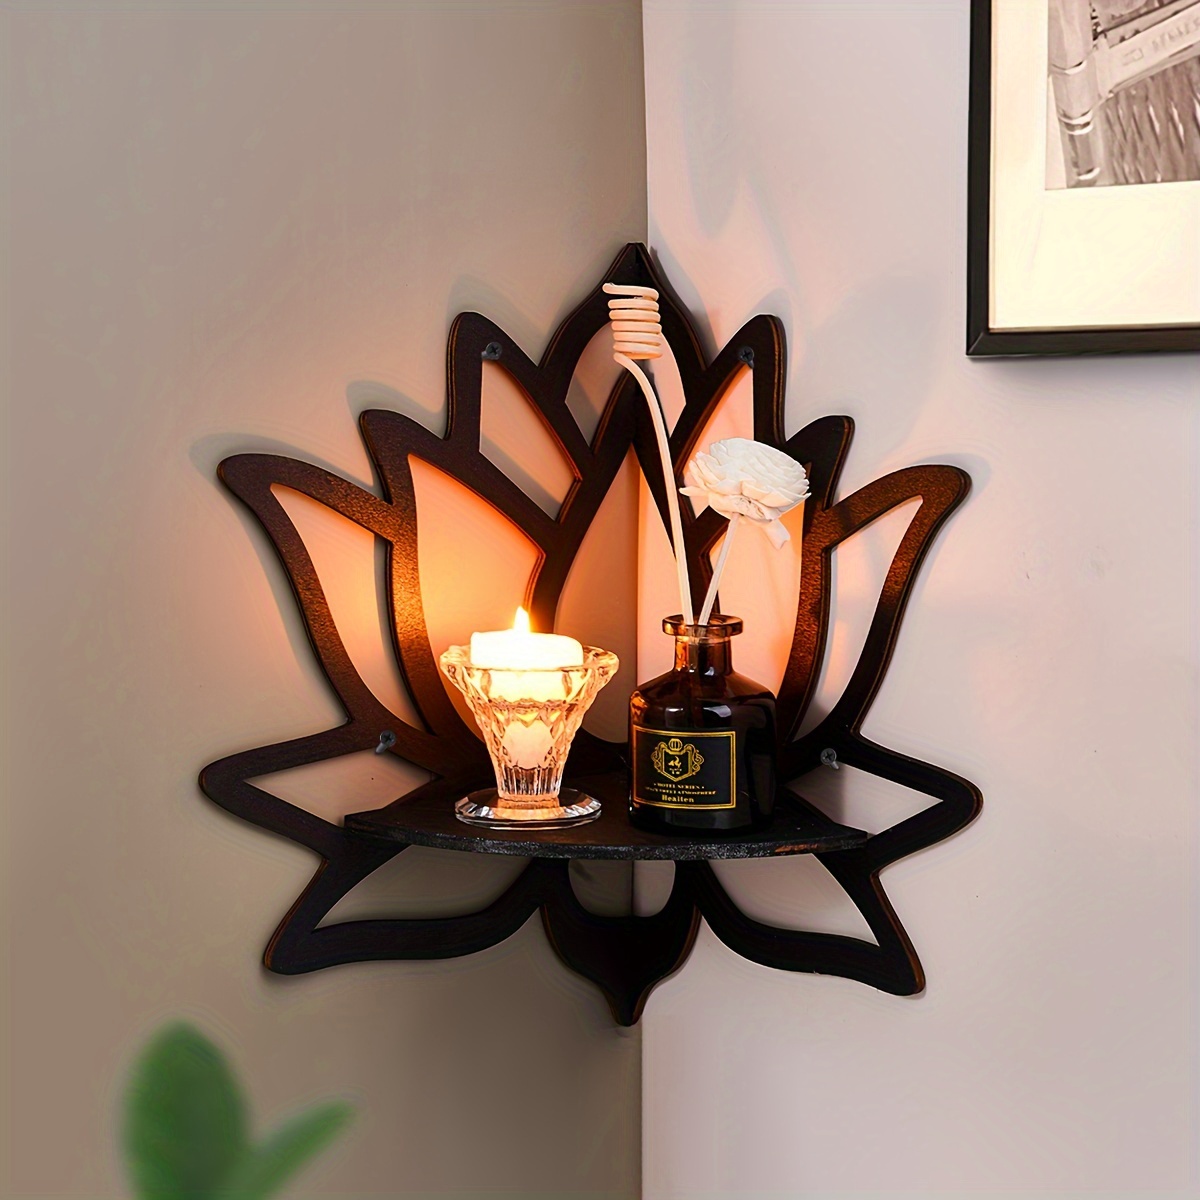 

Elegant Lotus Wooden Display Shelf - Multi-use For Candles, Crystals & Home Decor